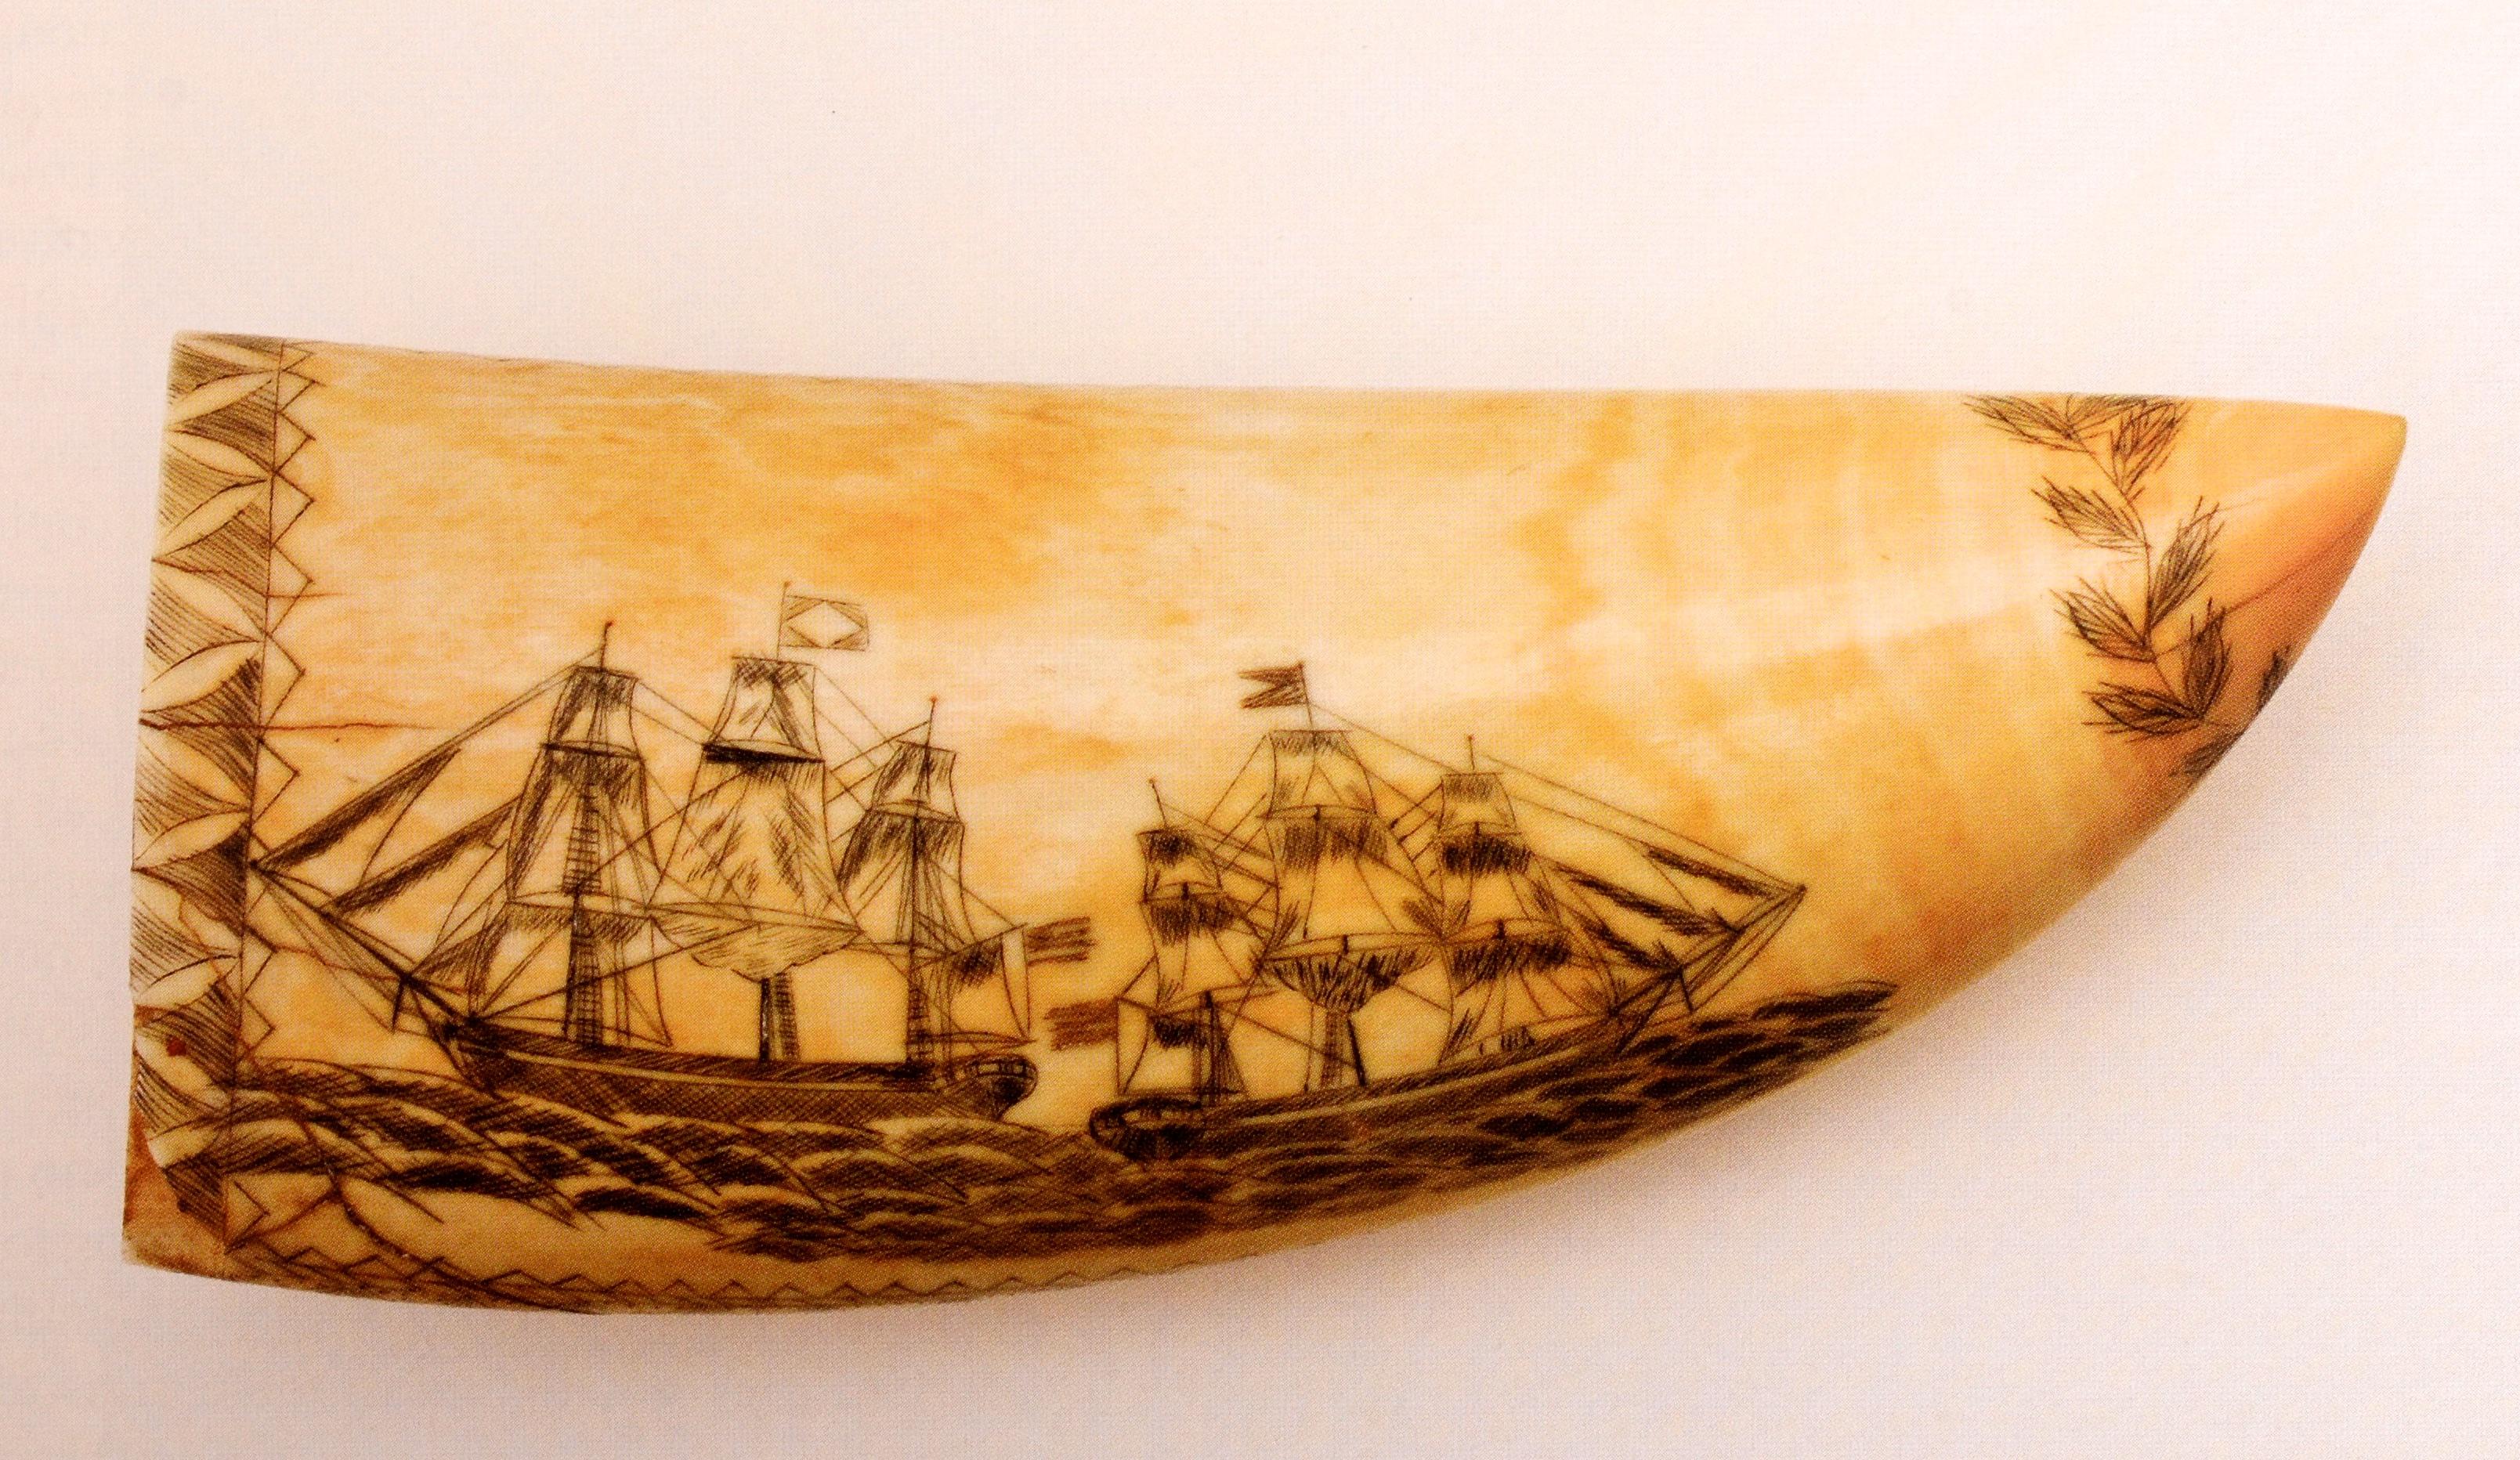 Ingenious Contrivances, Curiously Carved Scrimshaw, New Bedford Whaling Museum For Sale 7